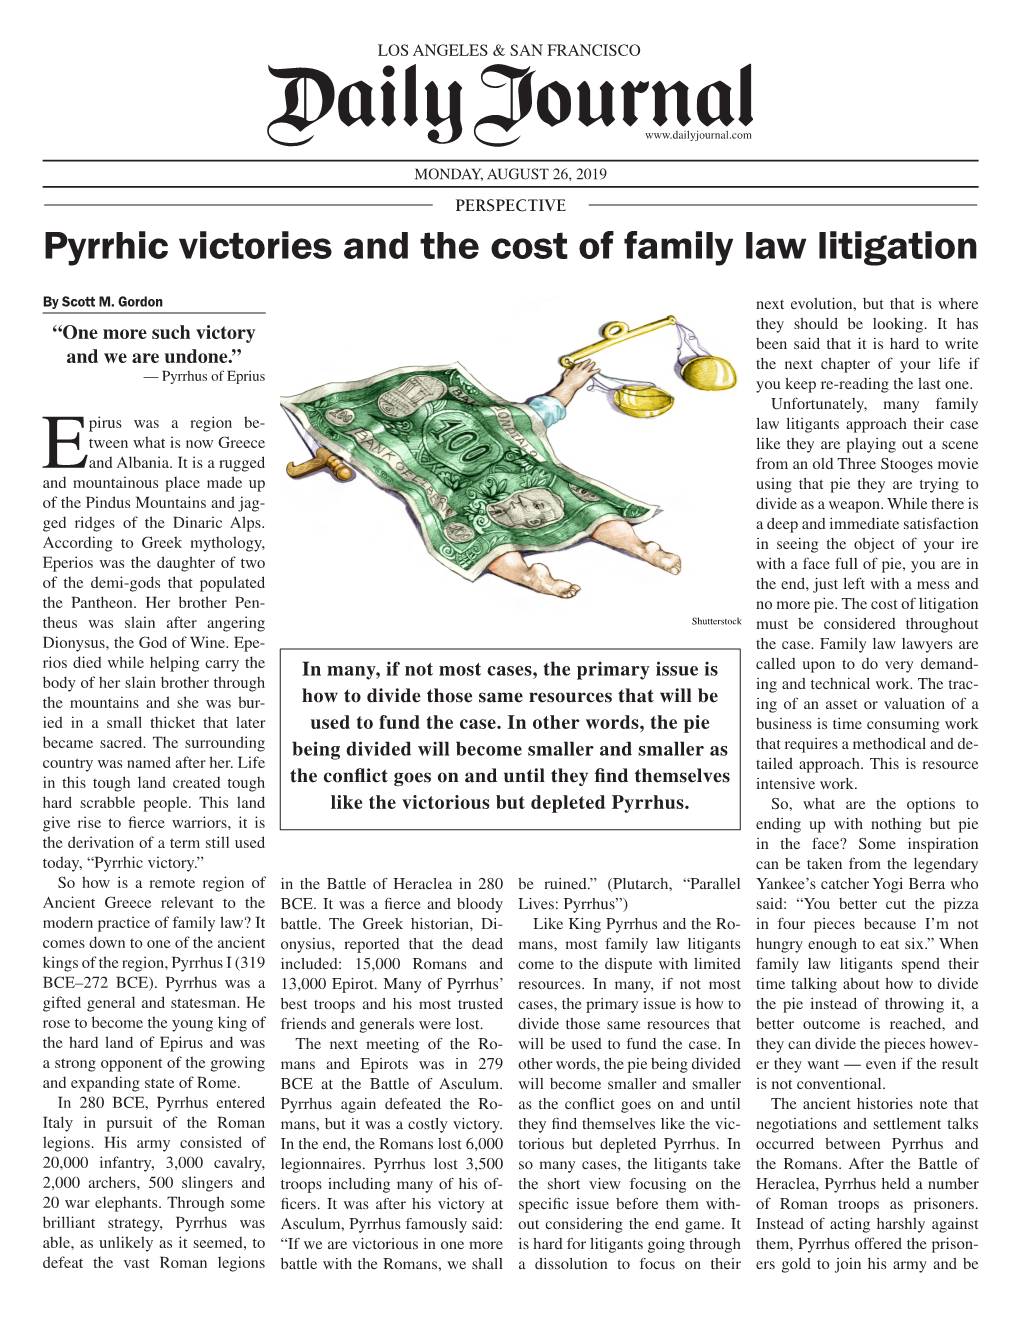 Pyrrhic Victories and the Cost of Family Law Litigation